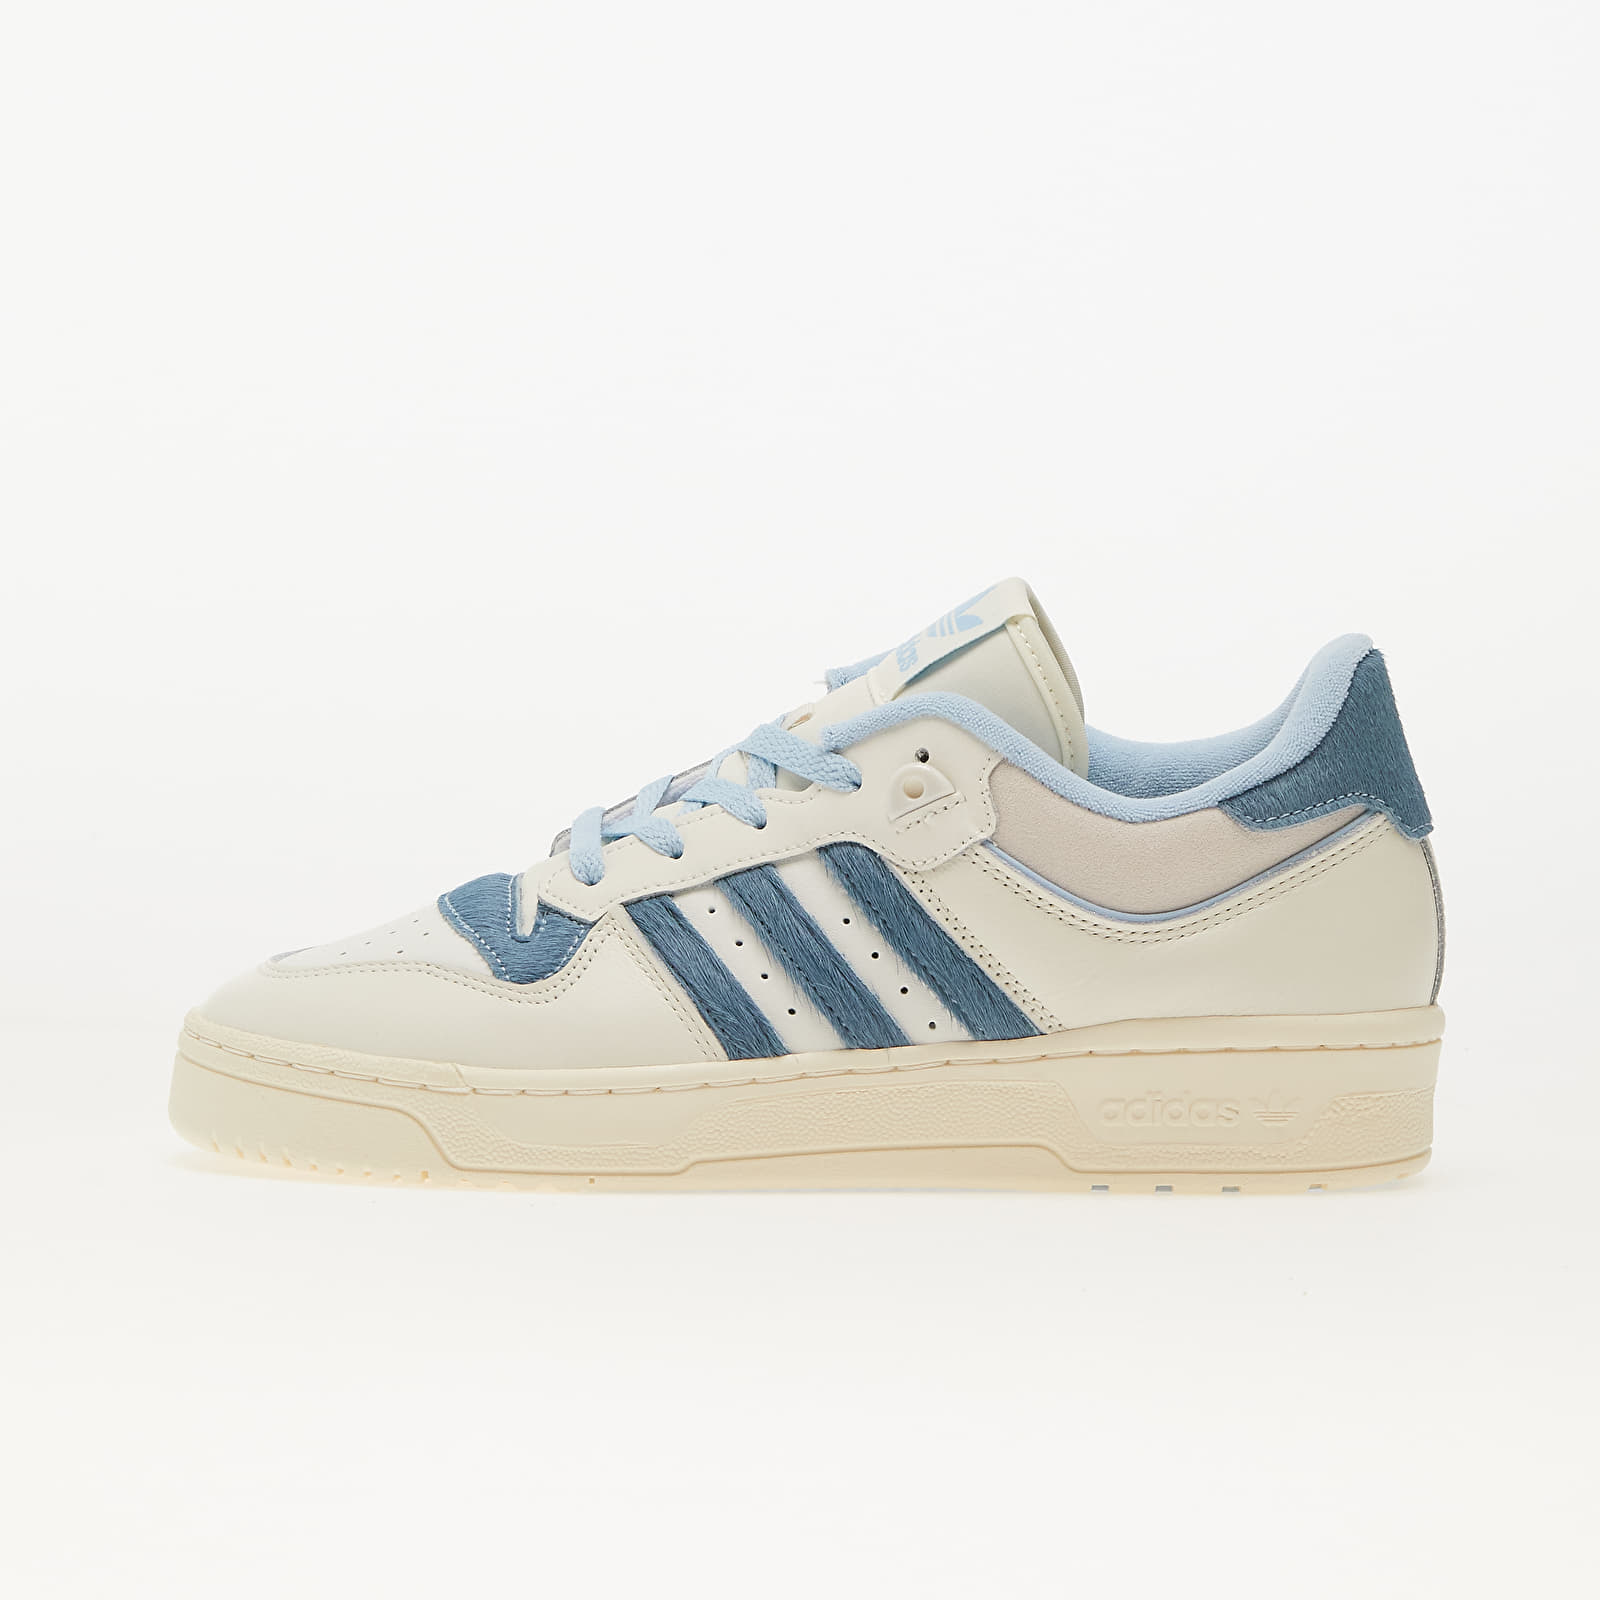 Men's shoes adidas Rivalry Low 86 Off White/ Clear Sky/ Orbit Grey